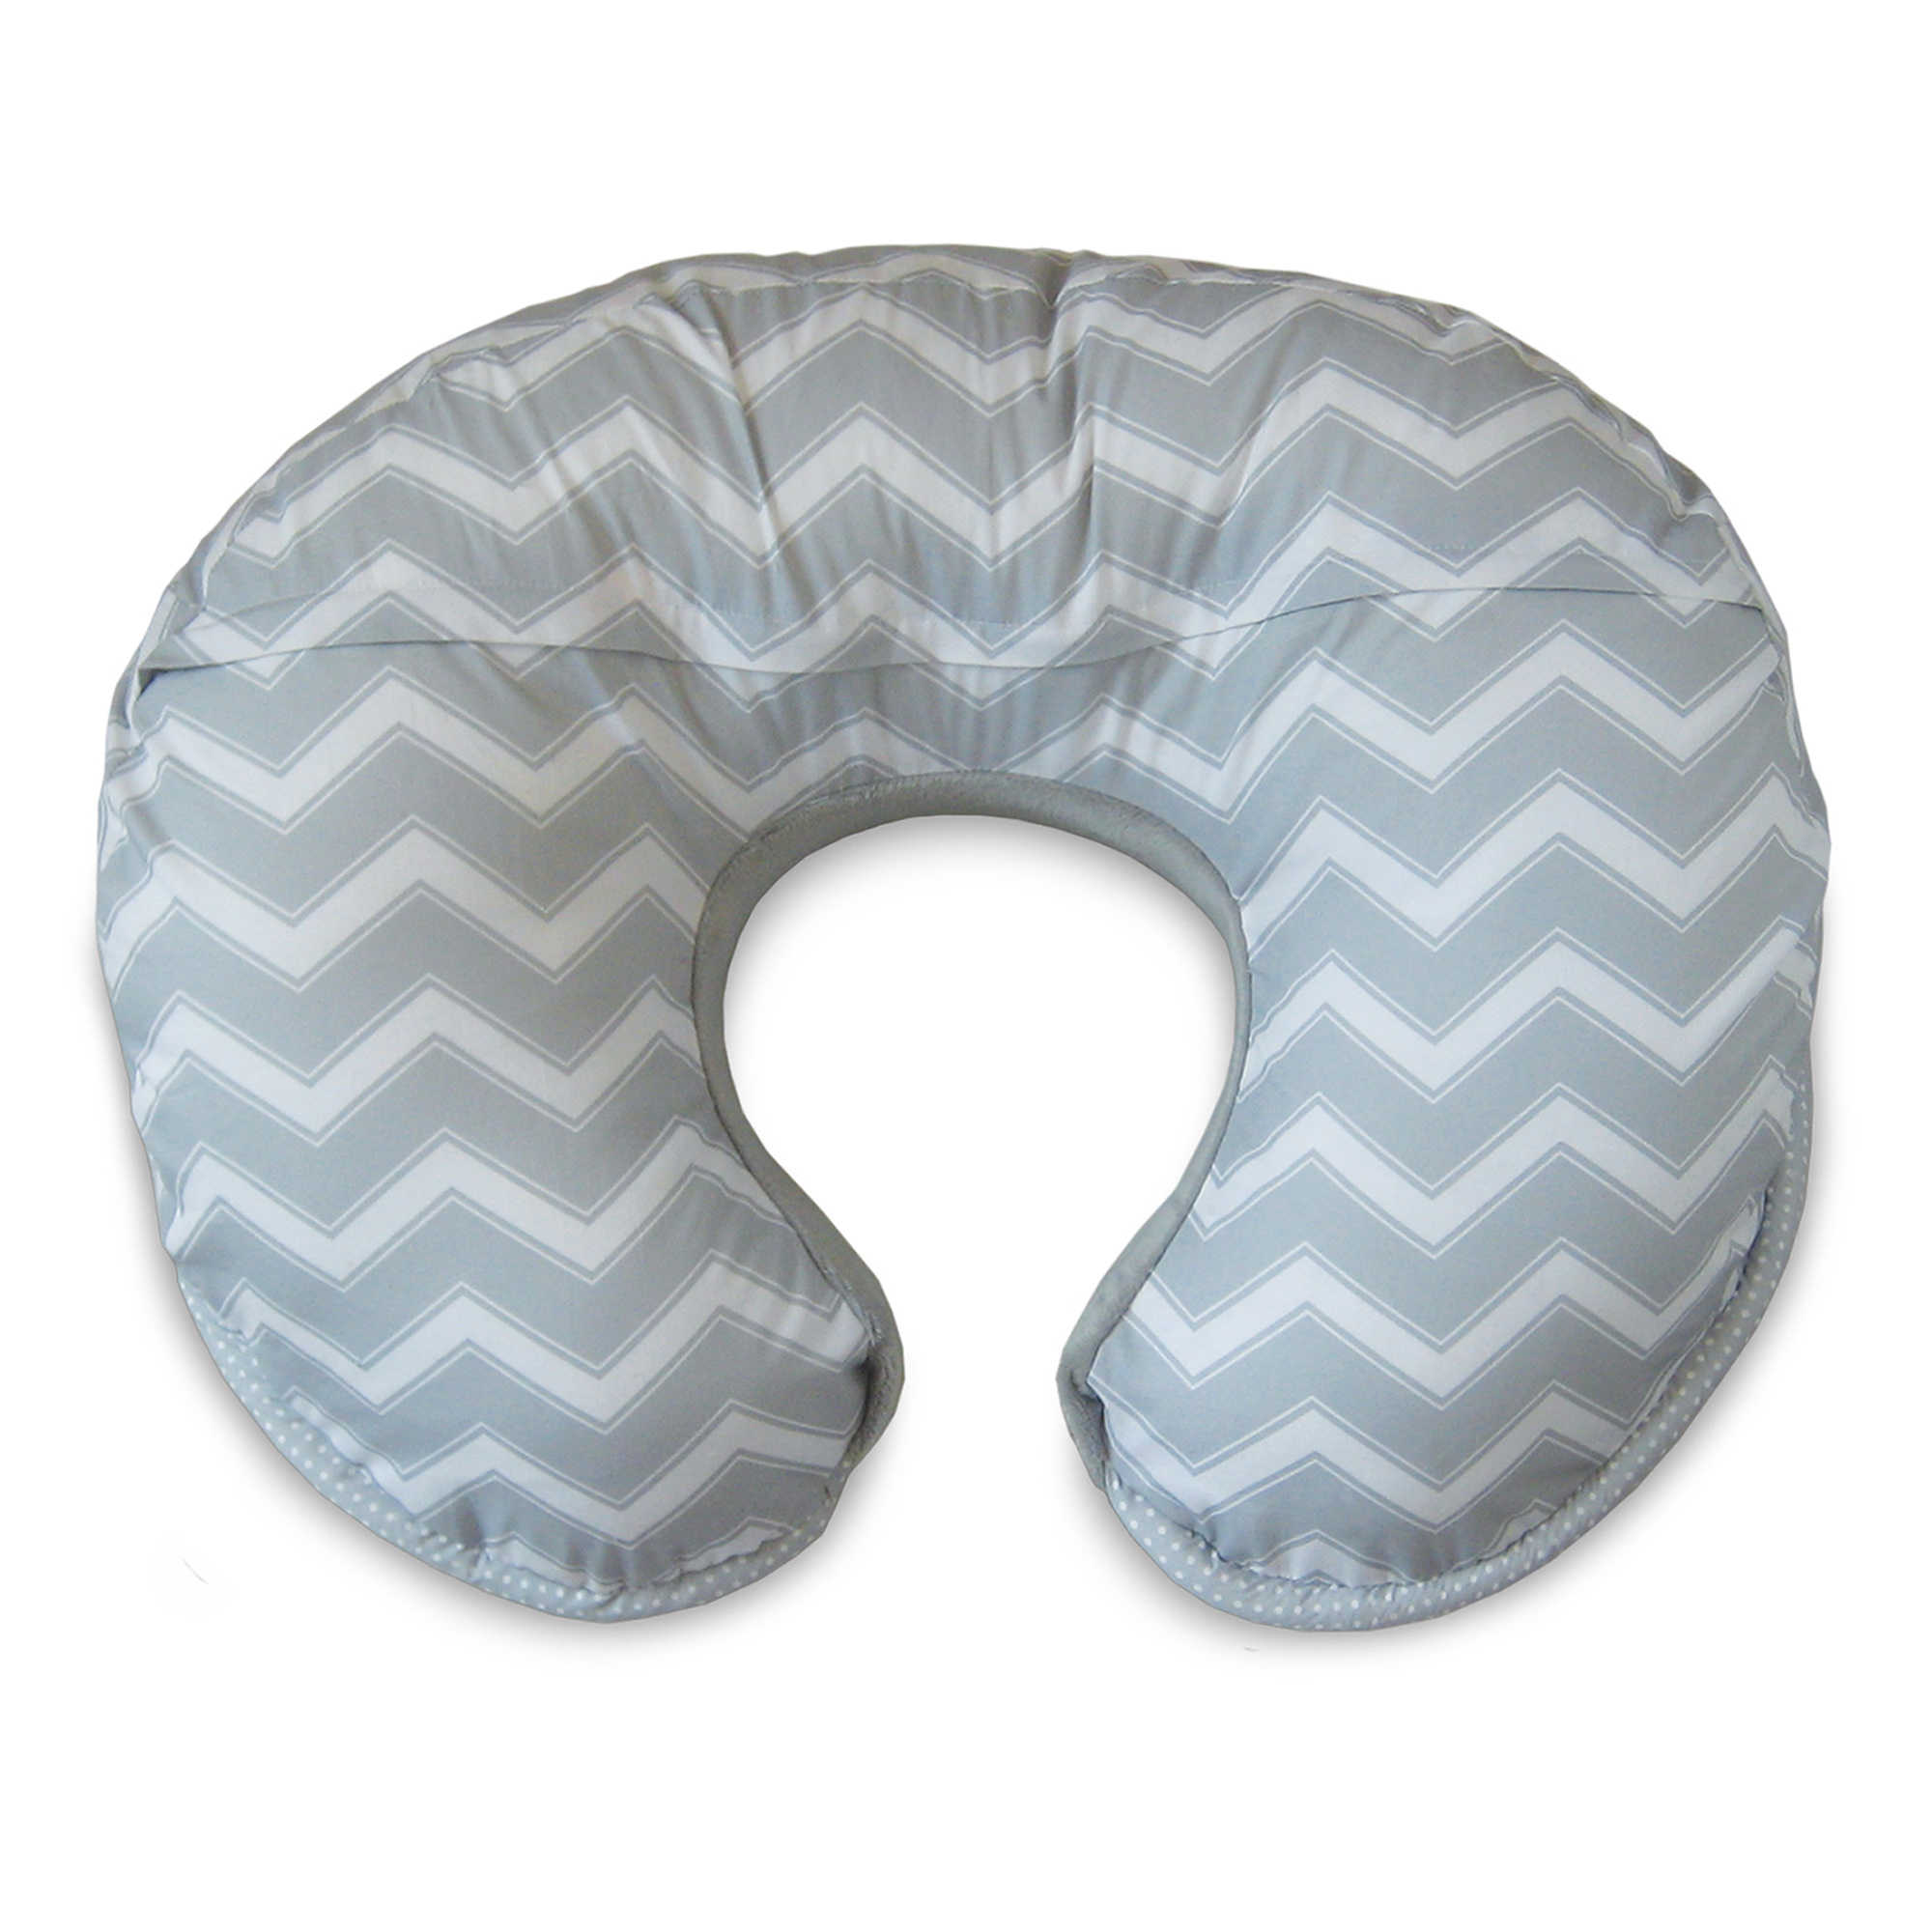 Boppy® Luxe Pillow With Reversible Slipcover In Grey Whale